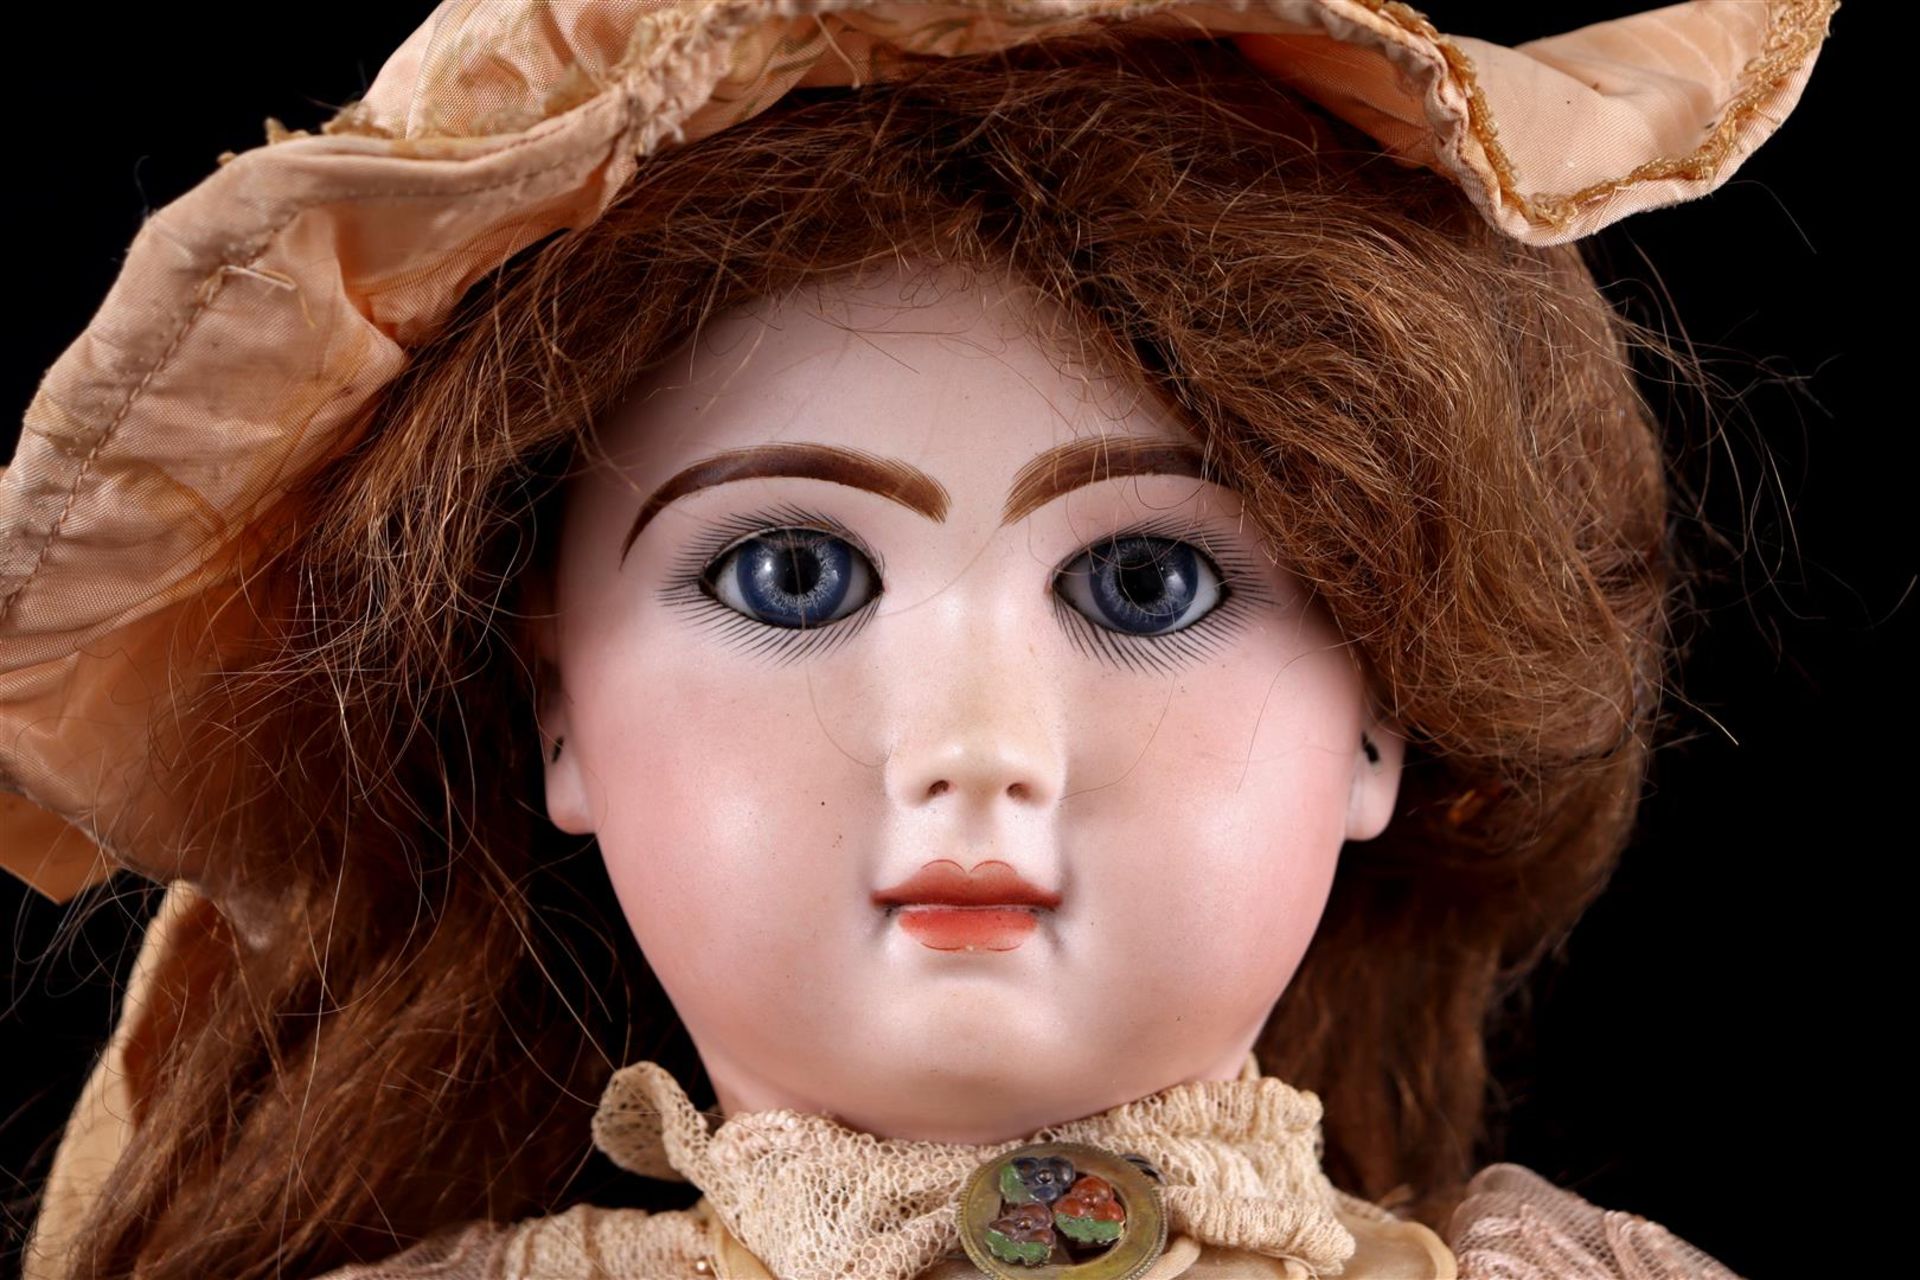 Jumeau doll with closed mouth - Image 3 of 6